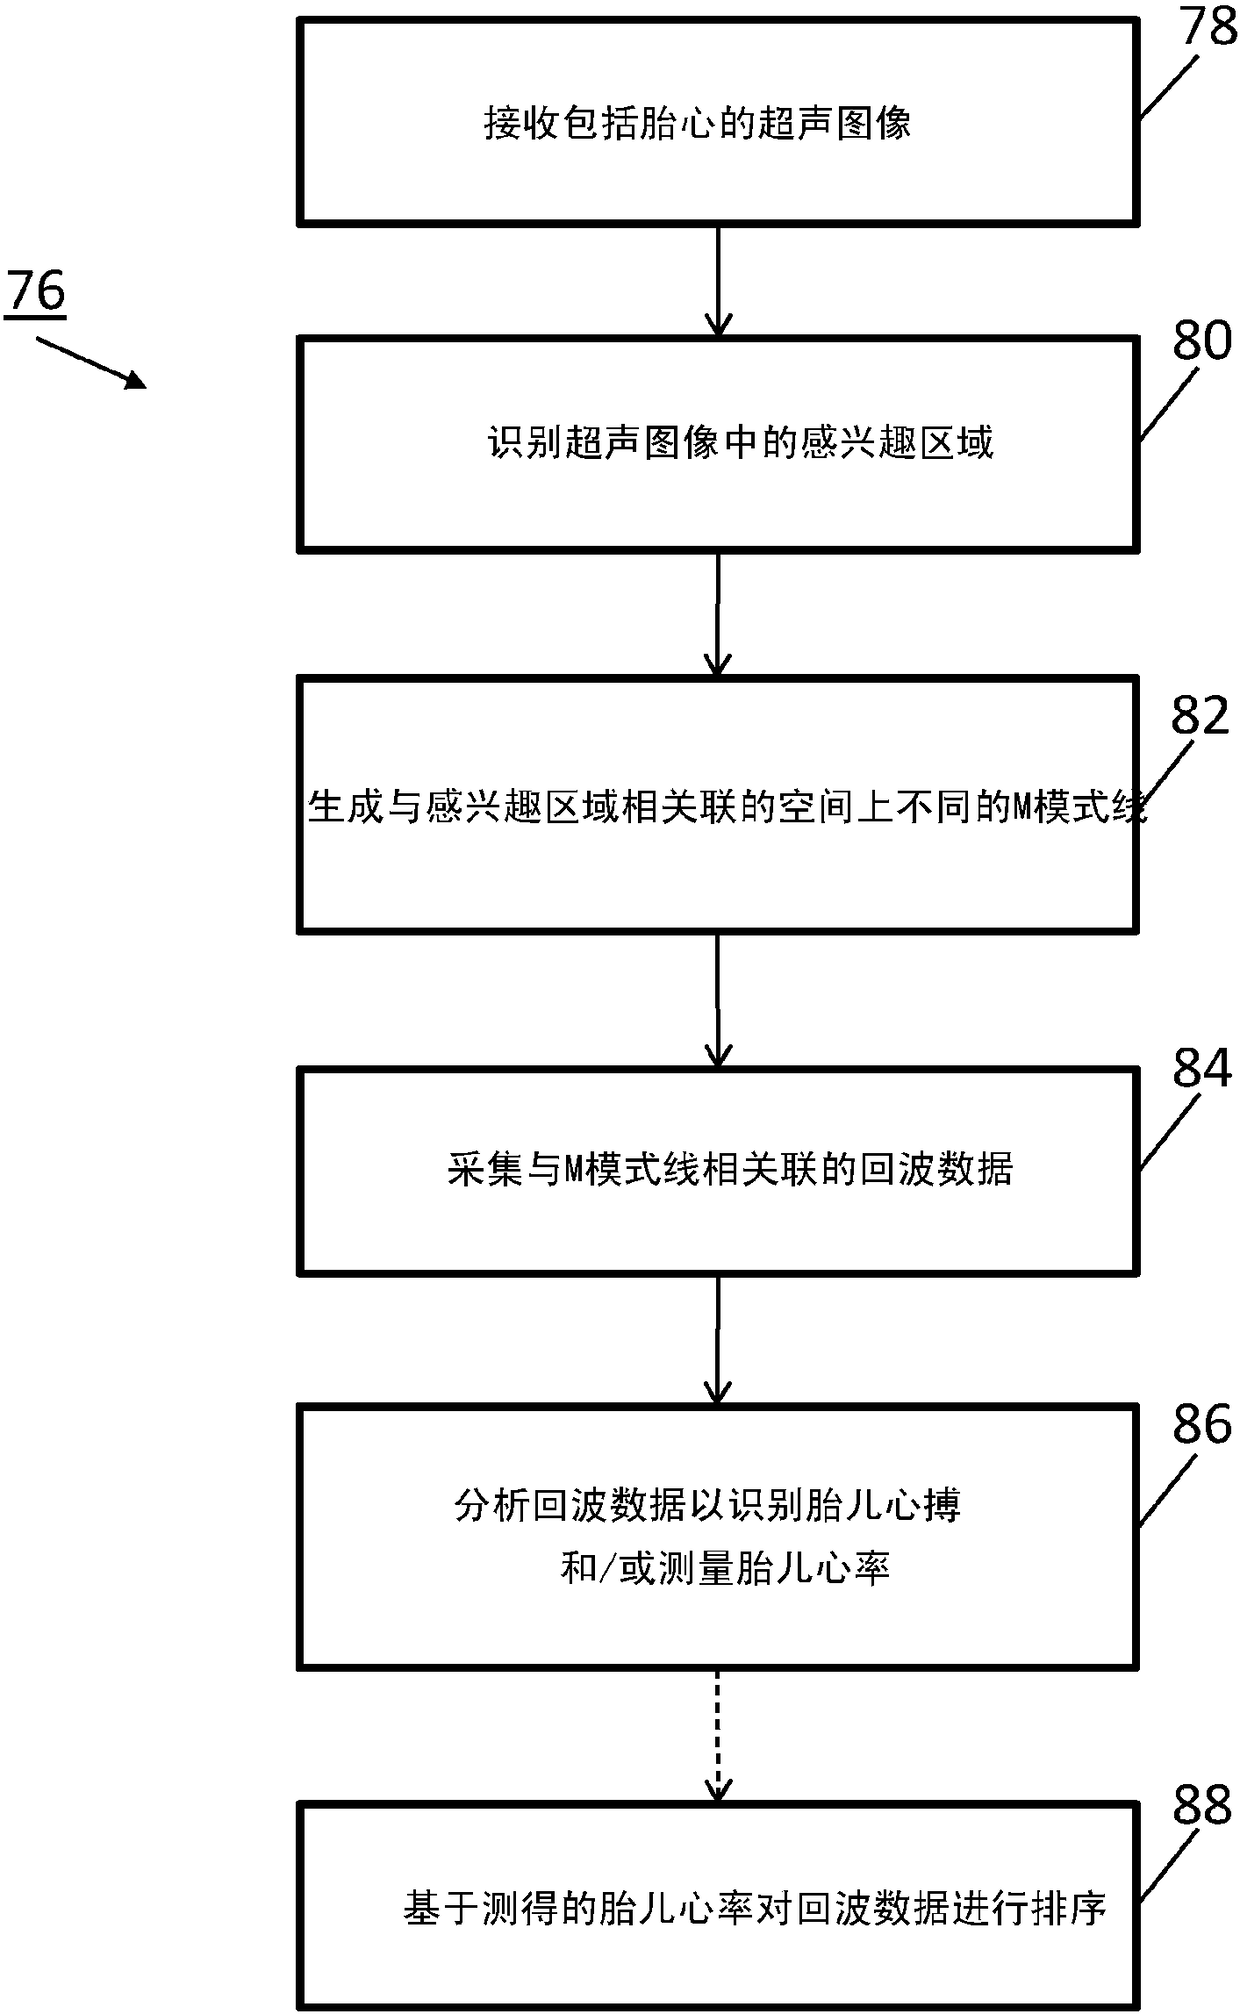 Ultrasound system and method for automated heartbeat recognition